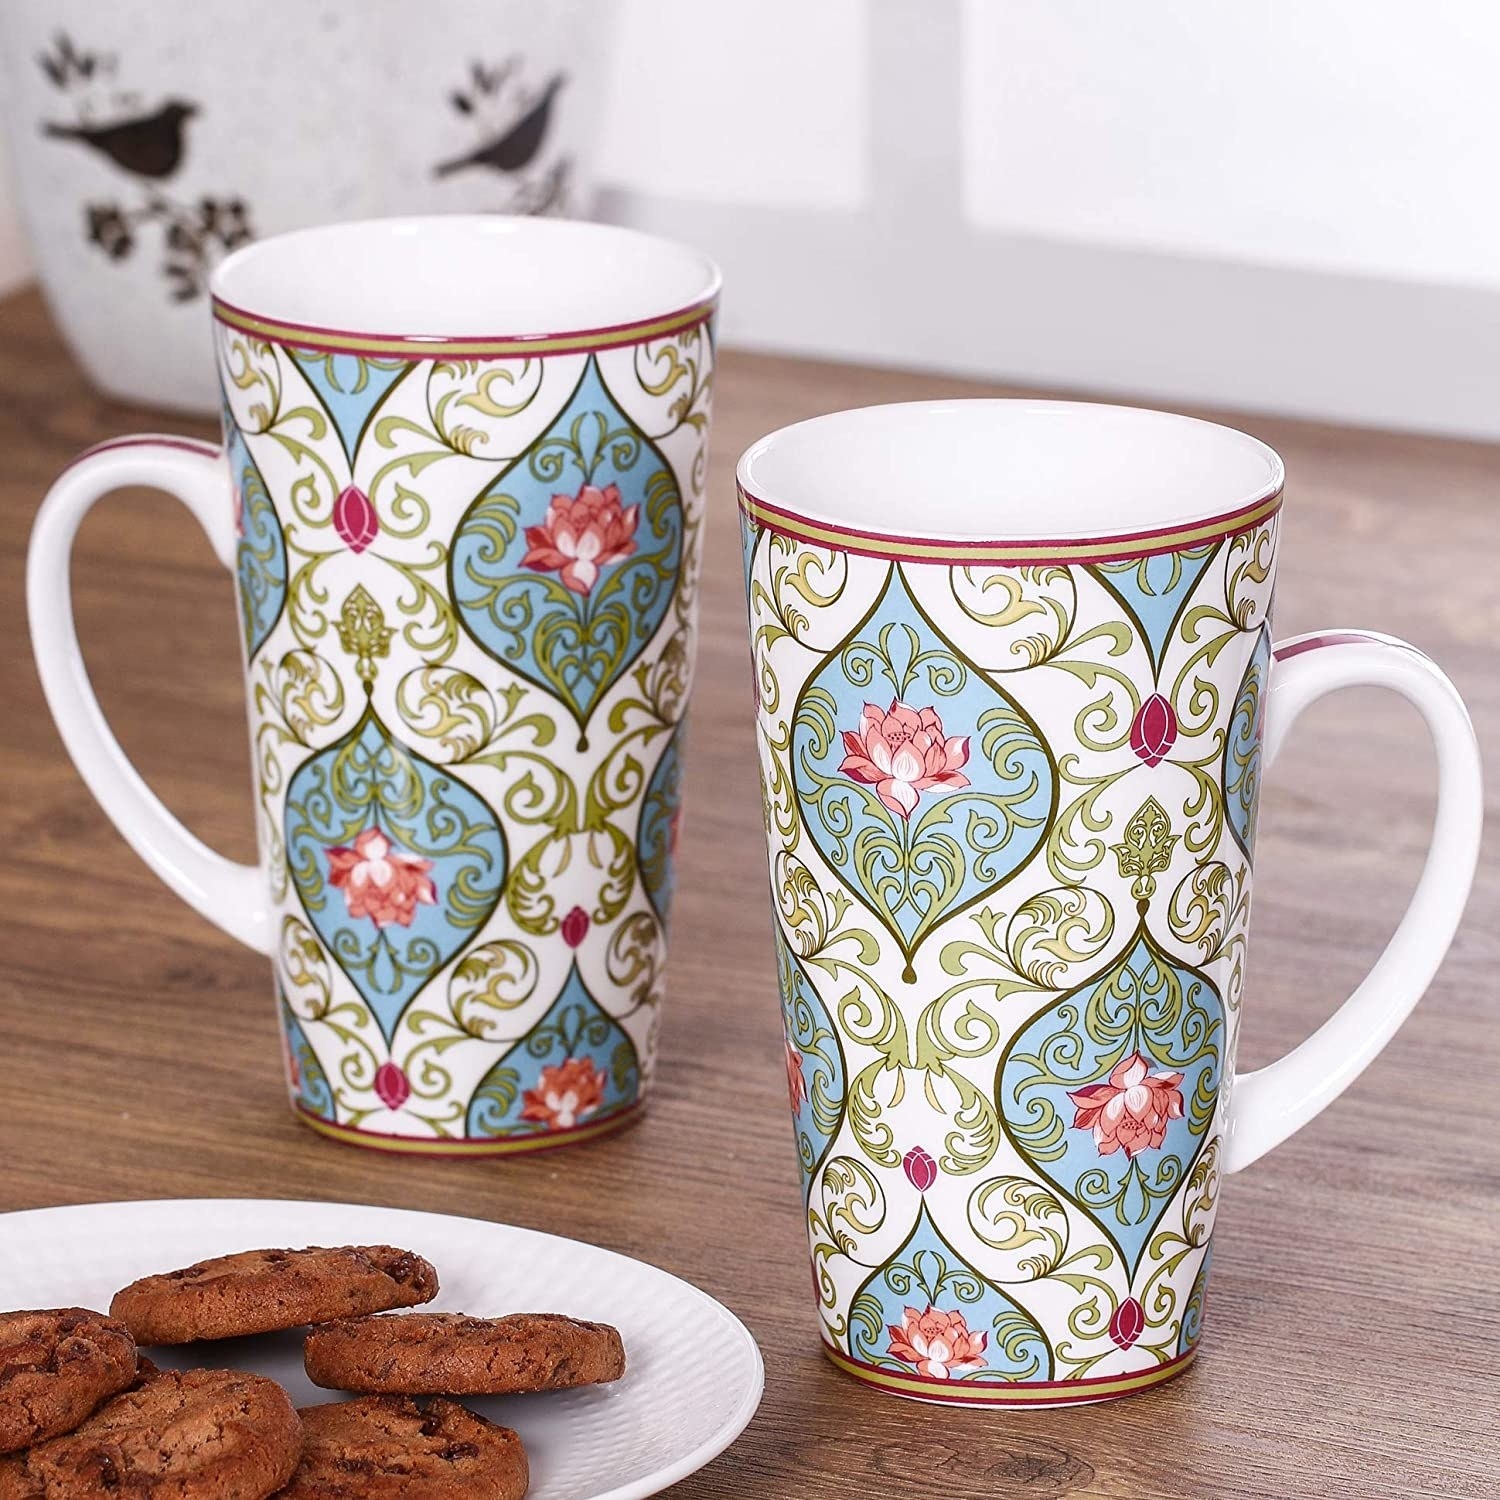 Two tall mugs next to chocolate chip cookies on a plate